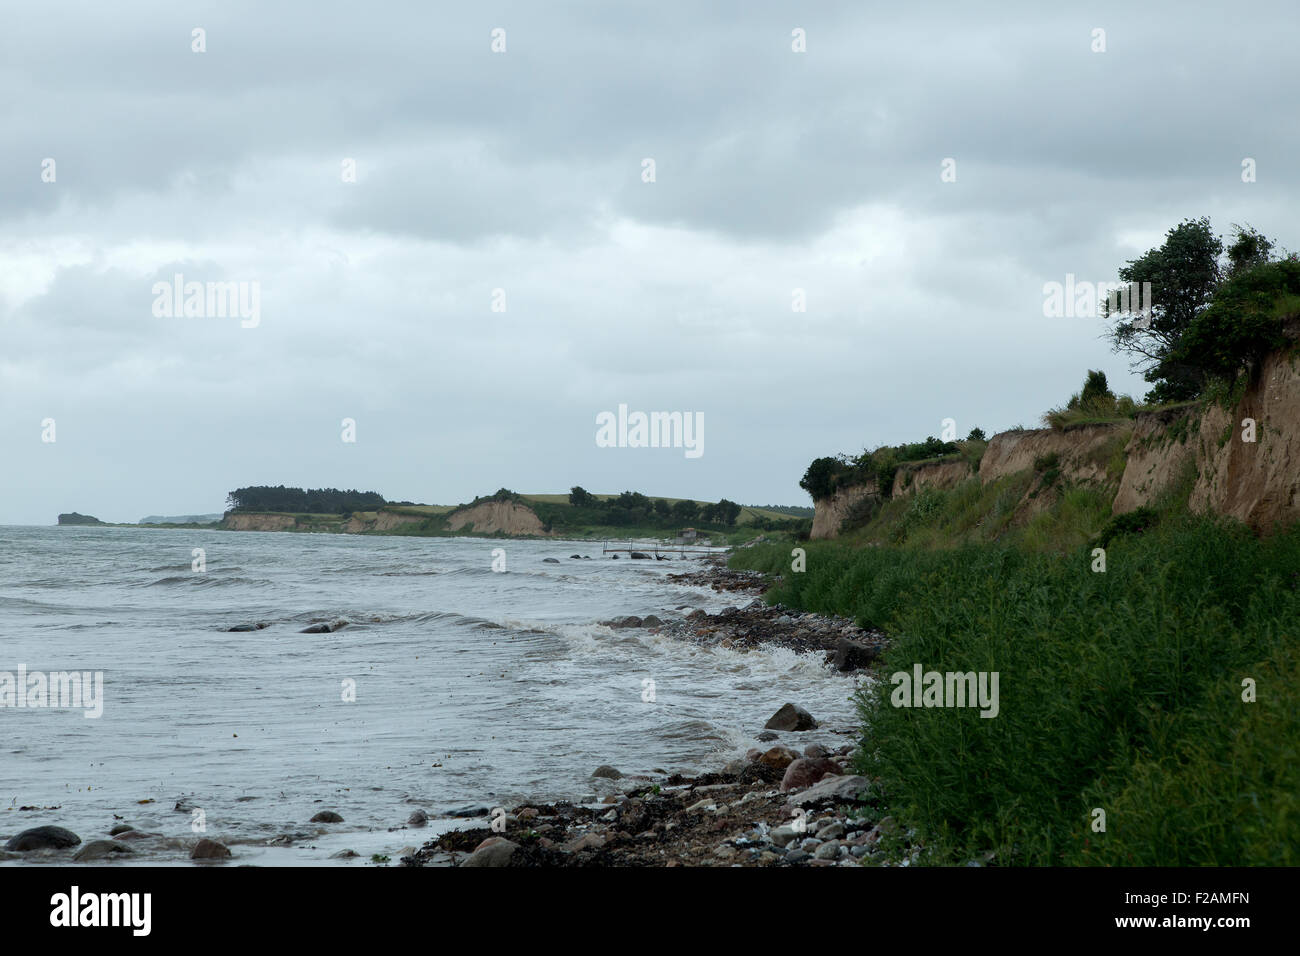 Cliff of boulder clay, Fyns Hoved, Funen, Denmark Stock Photo